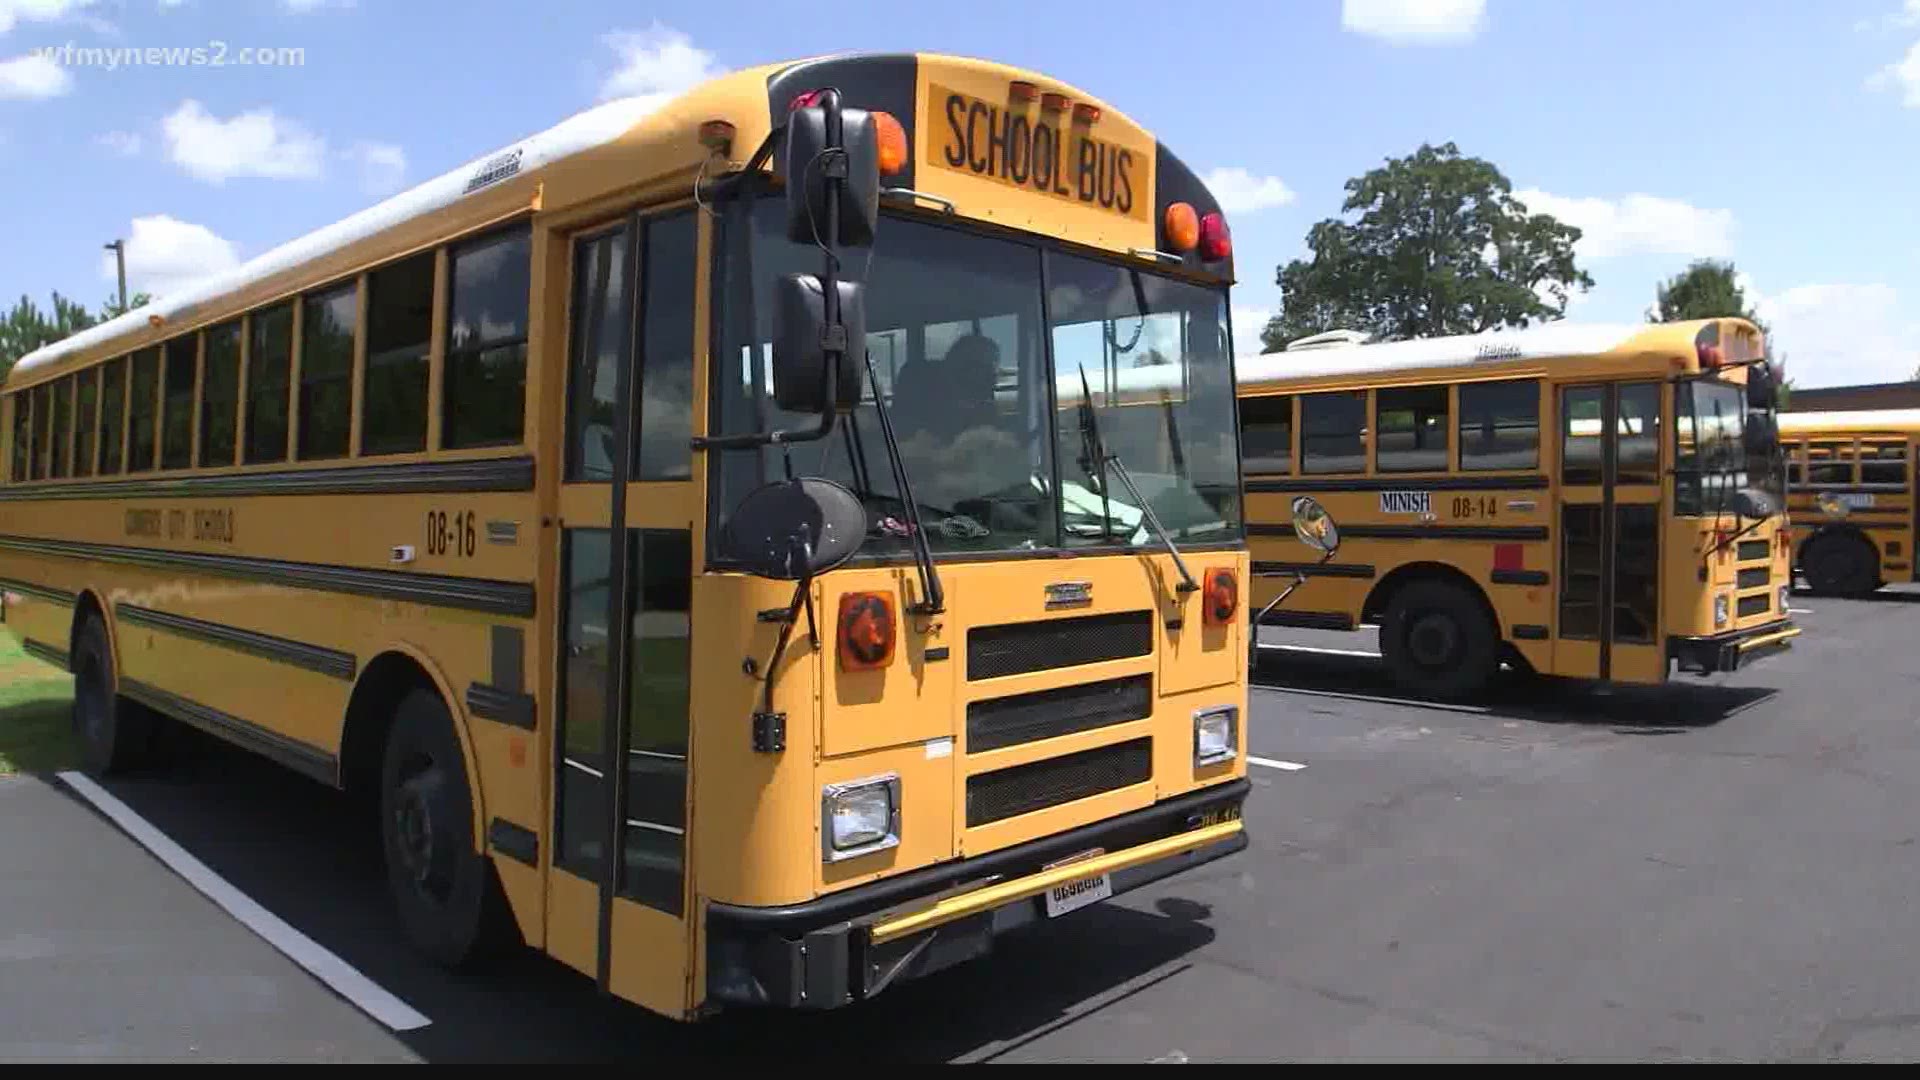 Coronavirus means some major changes to school bus rides.